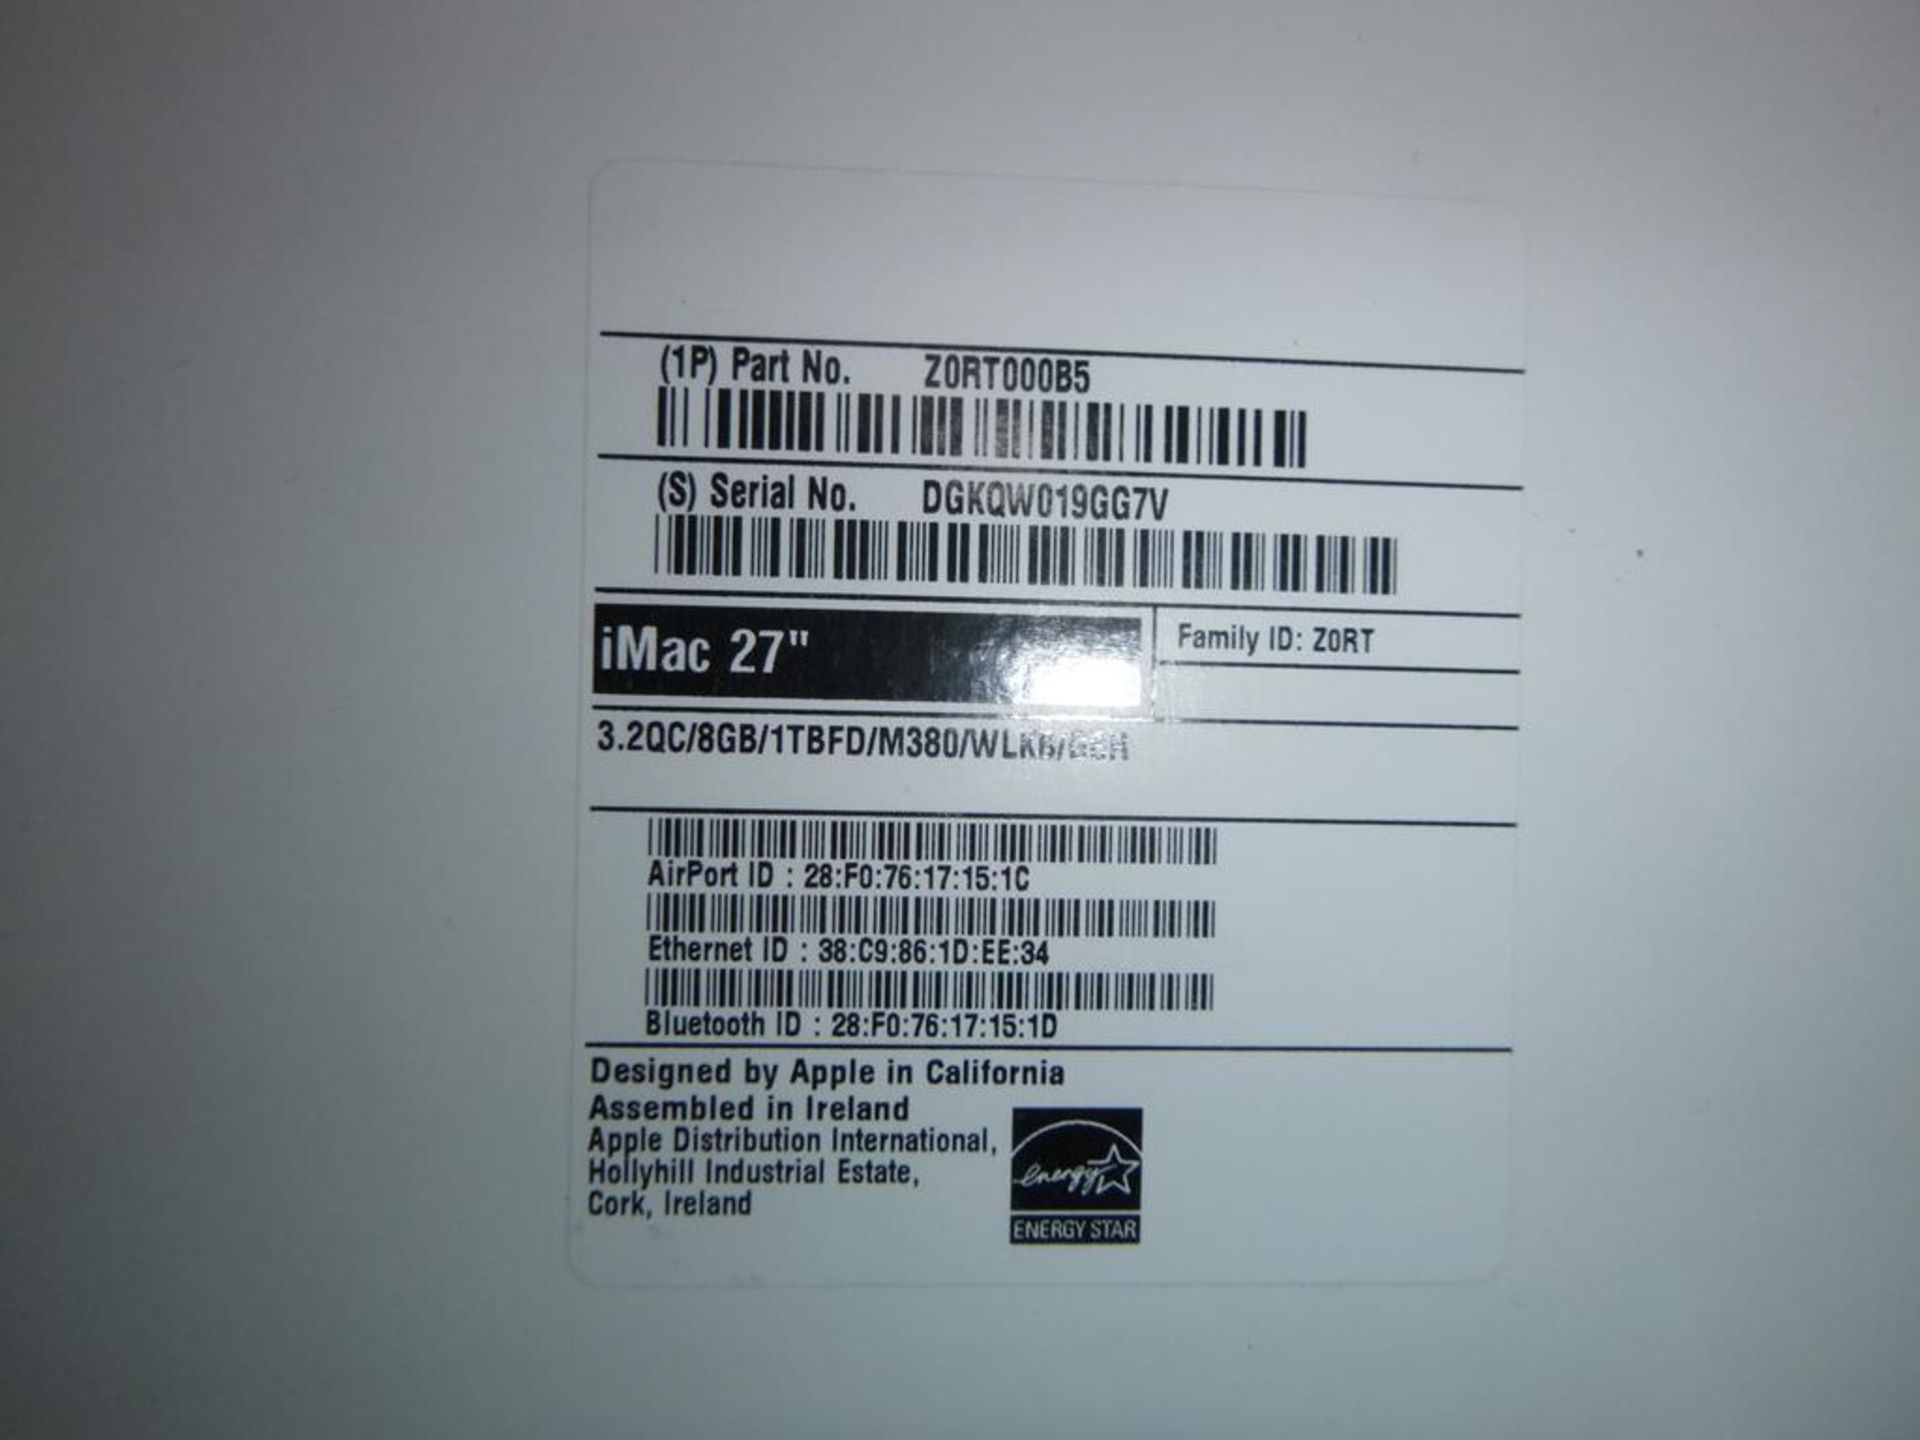 * Apple iMac 27'' Computer Model number A1419 with Apple Keyboard, Mouse and Power Cable (boxed) - Image 7 of 7